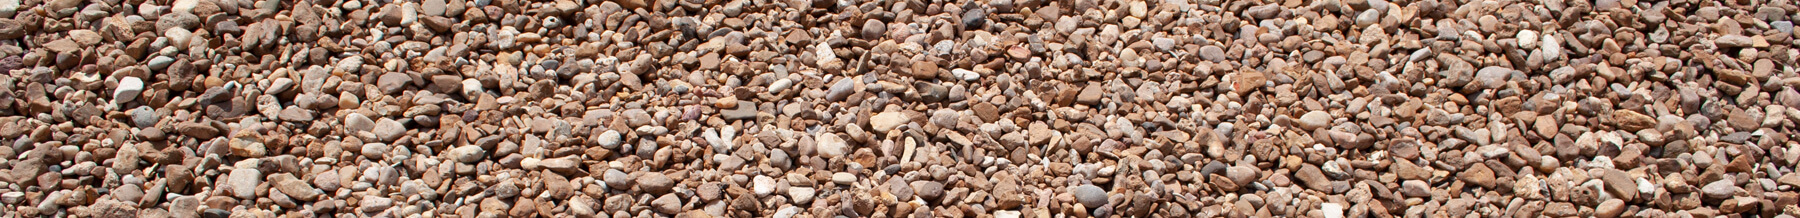 close up wide shot of small river rock